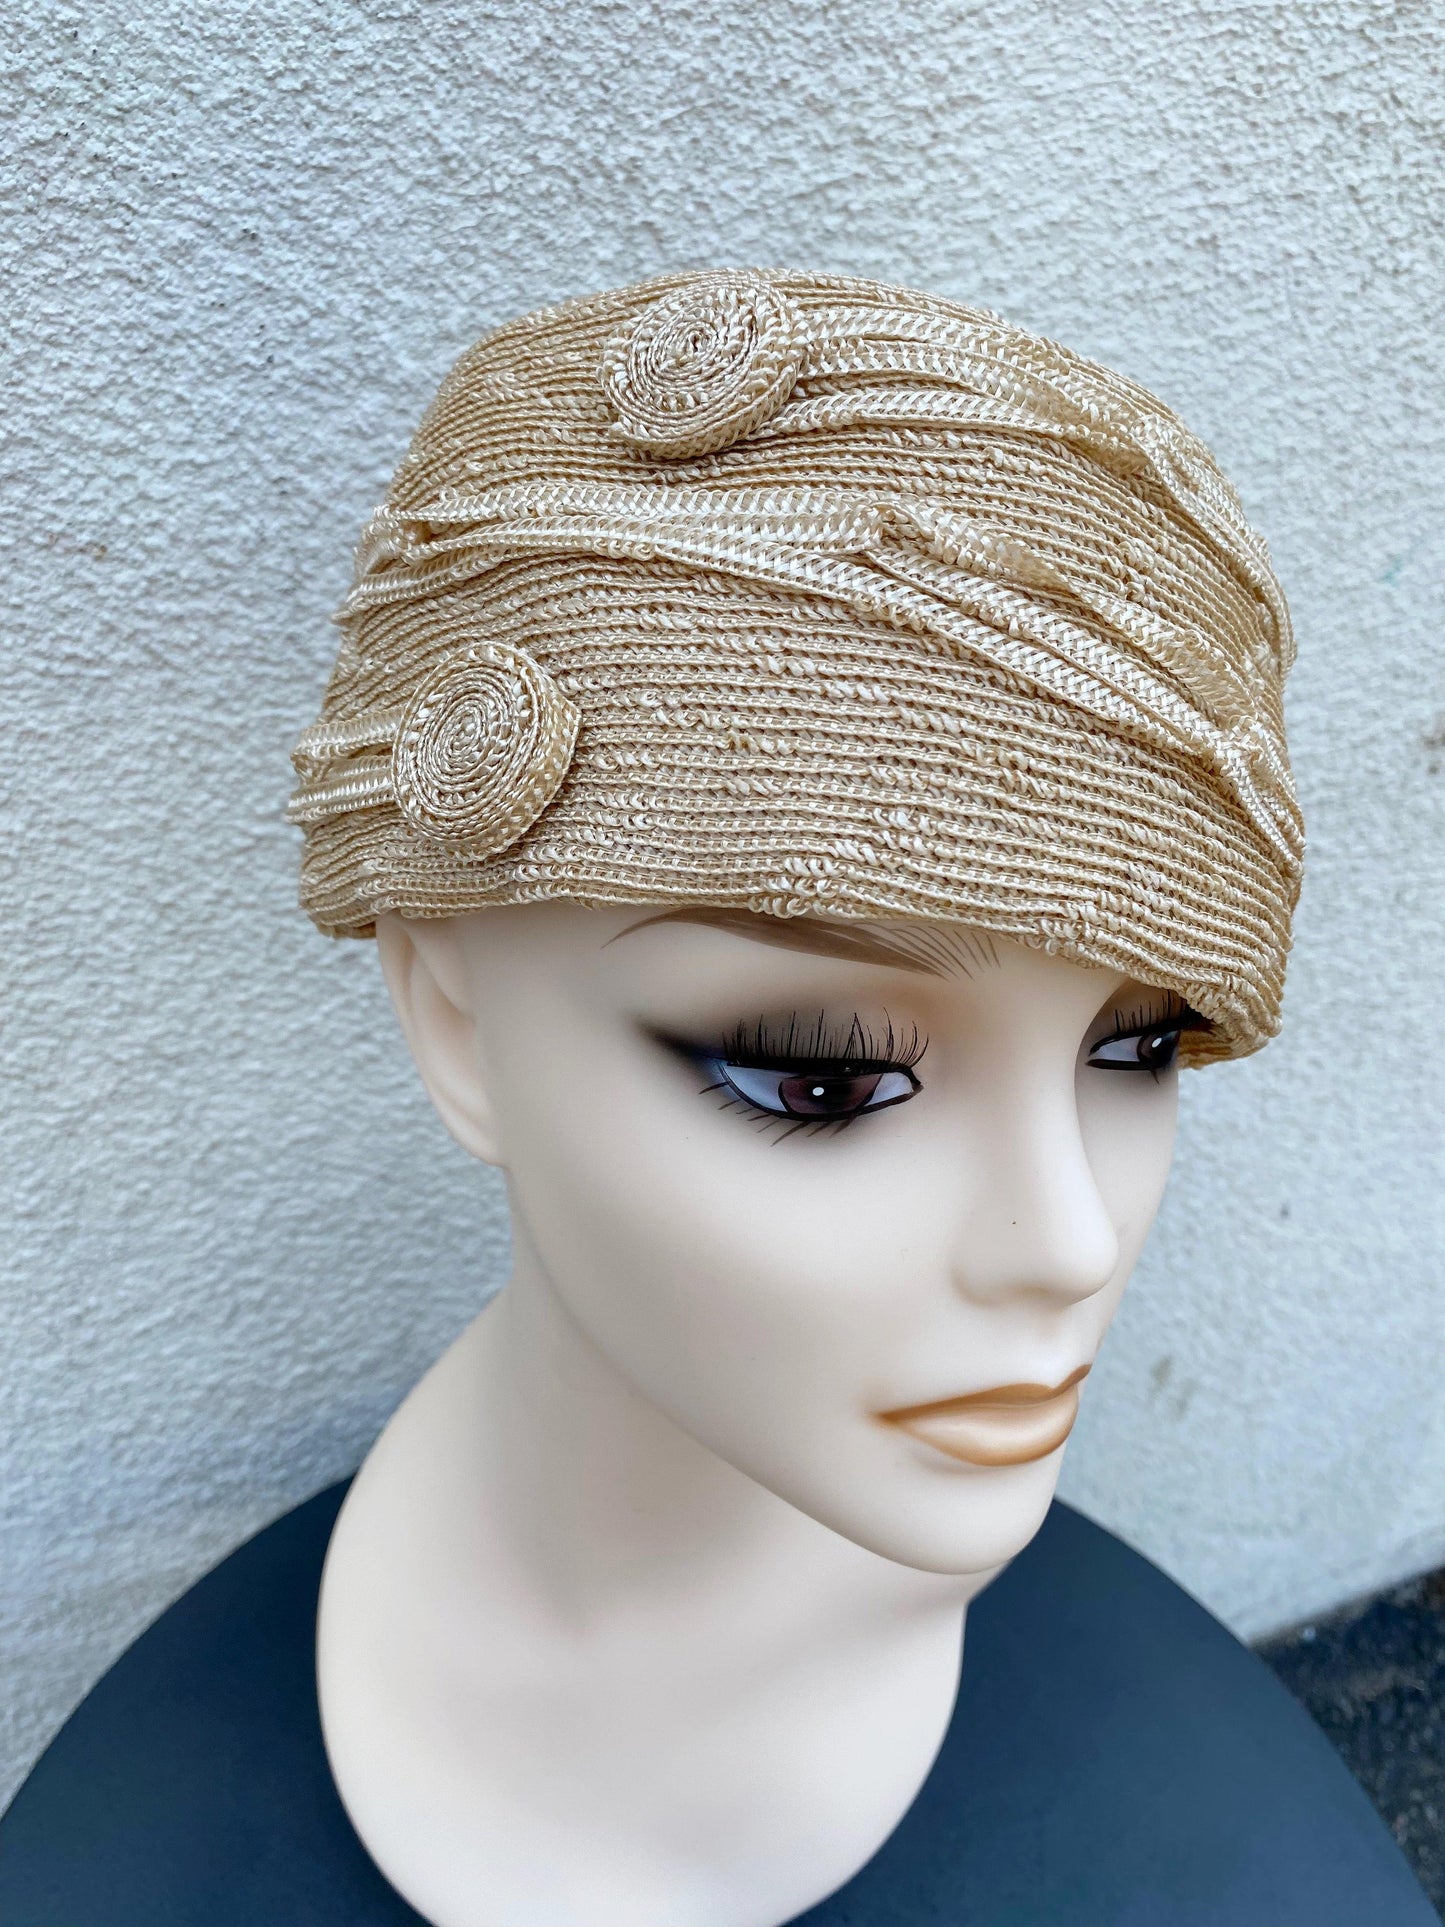 1920's Beige Straw Cloche Hat with Woven Circles - A Walk Thru Time Vintage